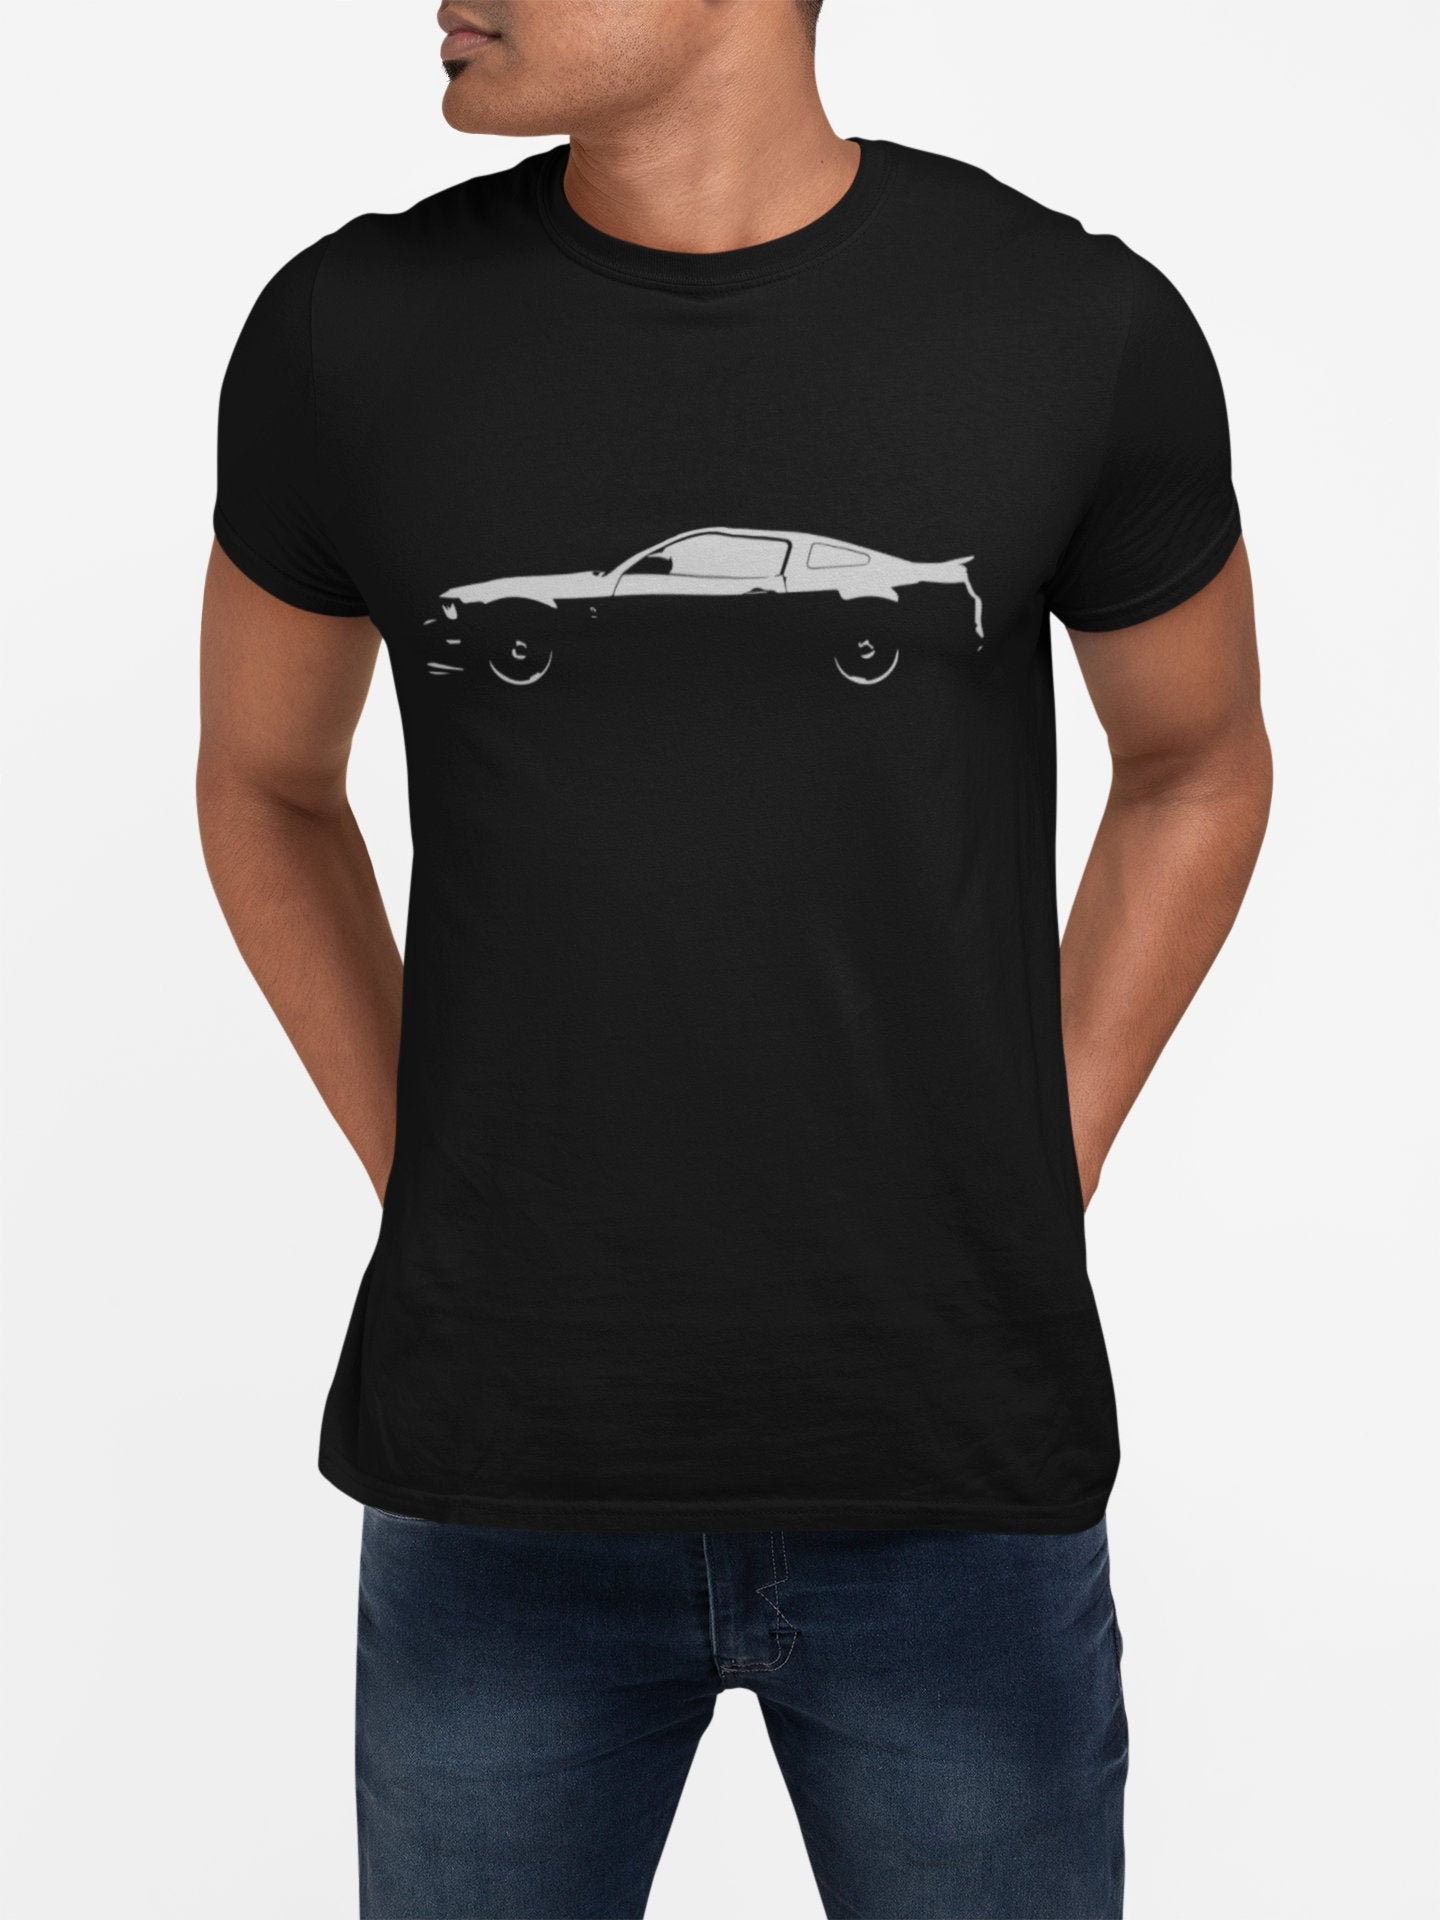 Ford Mustang Shelby GT500 T-Shirt sold by ChaZhan | SKU 26538421 | 45% OFF  Printerval